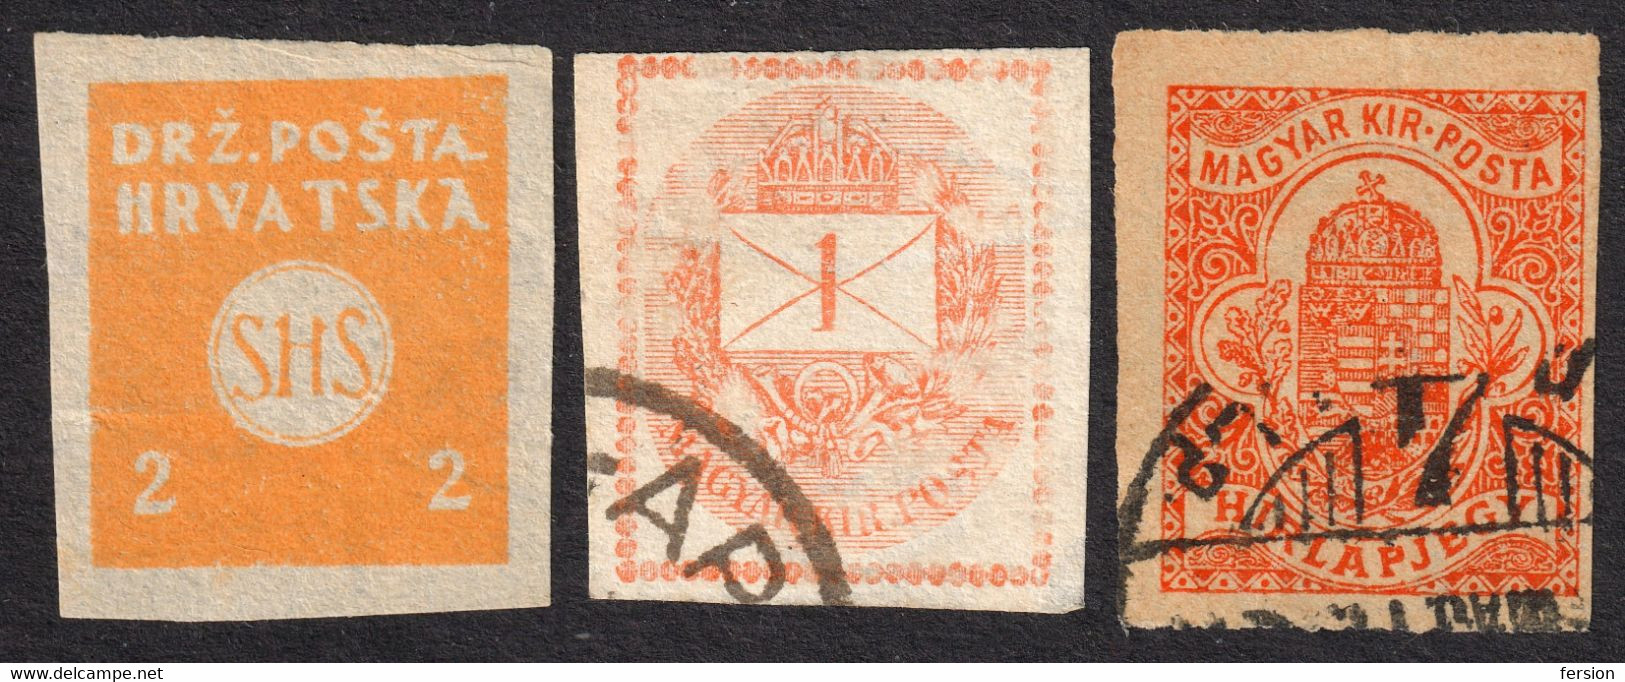 Hungary Croatia SHS Newspaper Stamp - Unperforated - Used / Letter Cover Coat Of Arms - Zeitungsmarken